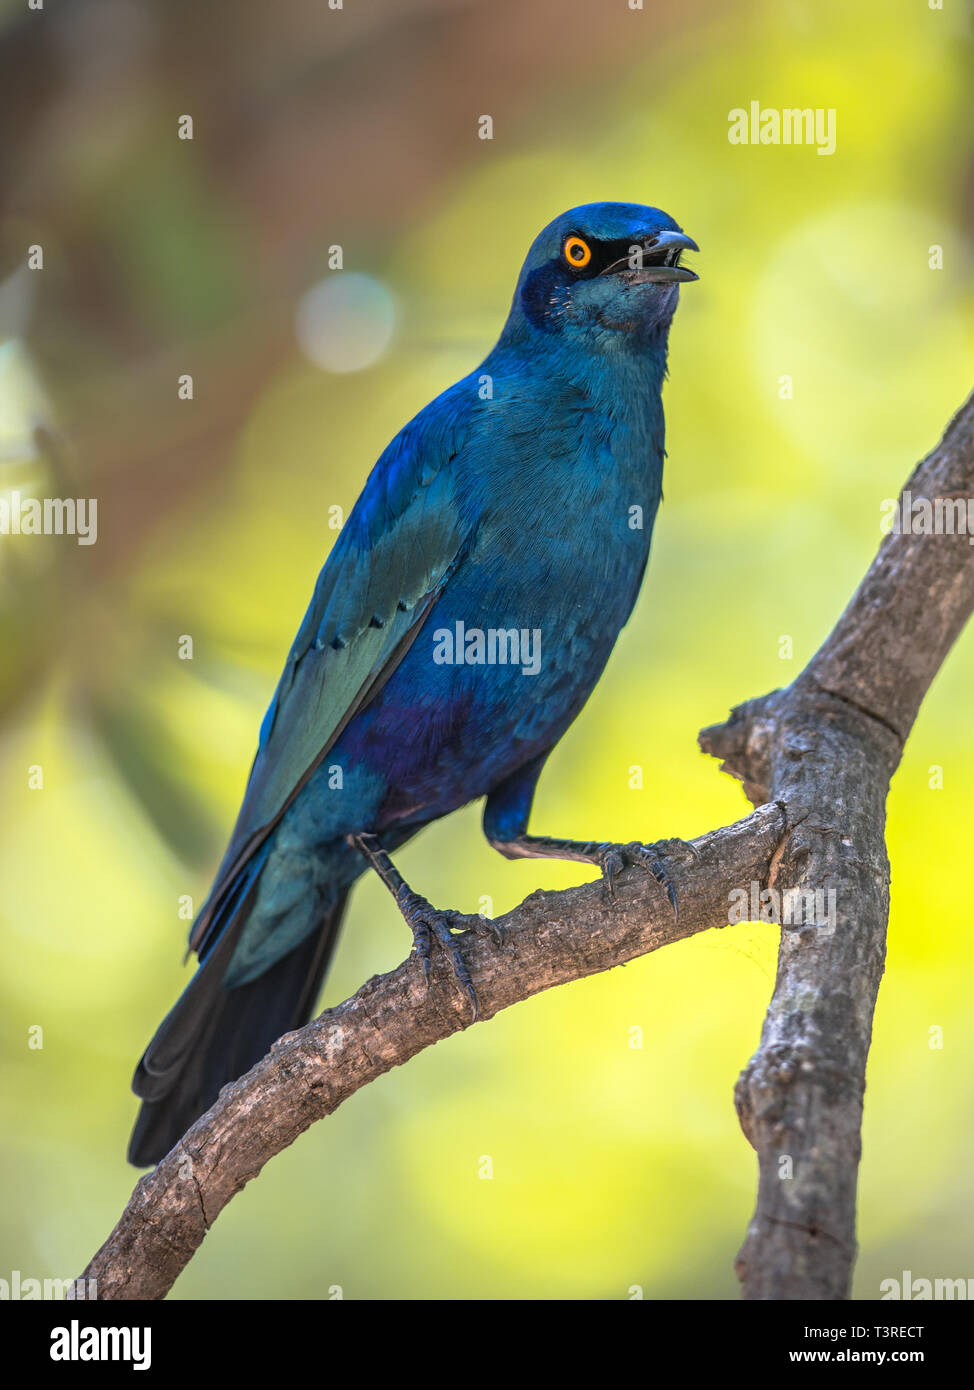 Greater blue-eared Starling (Lamprotornis chalybaeus) bird perched in dhade of tree in Kruger national park South Africa Stock Photo